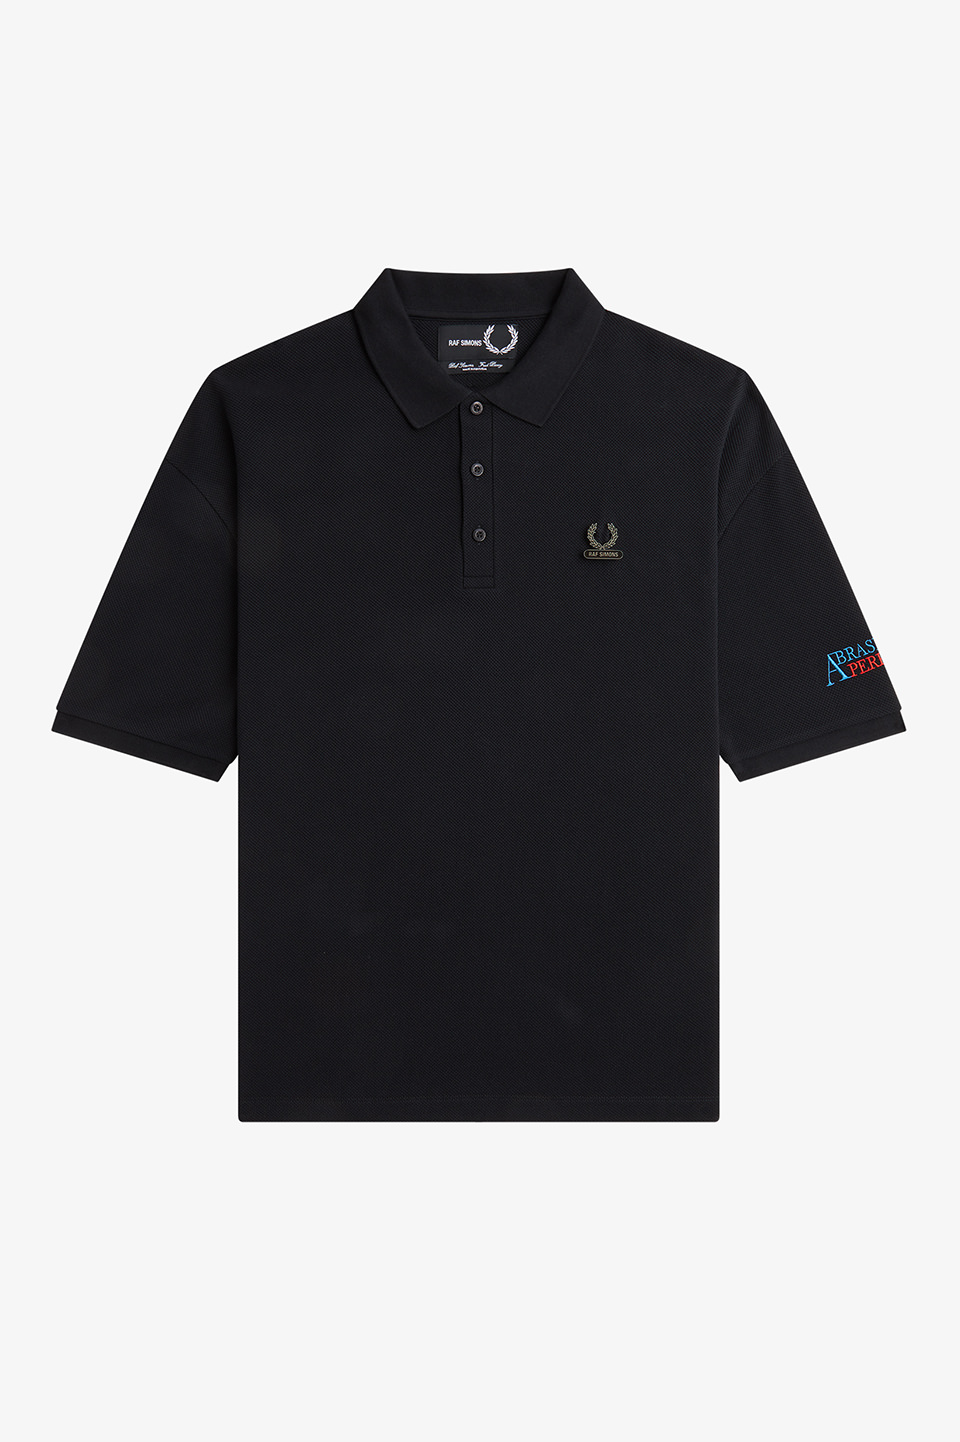 RAF SIMONS FRED PERRY 半袖ポロシャツ　2019SS